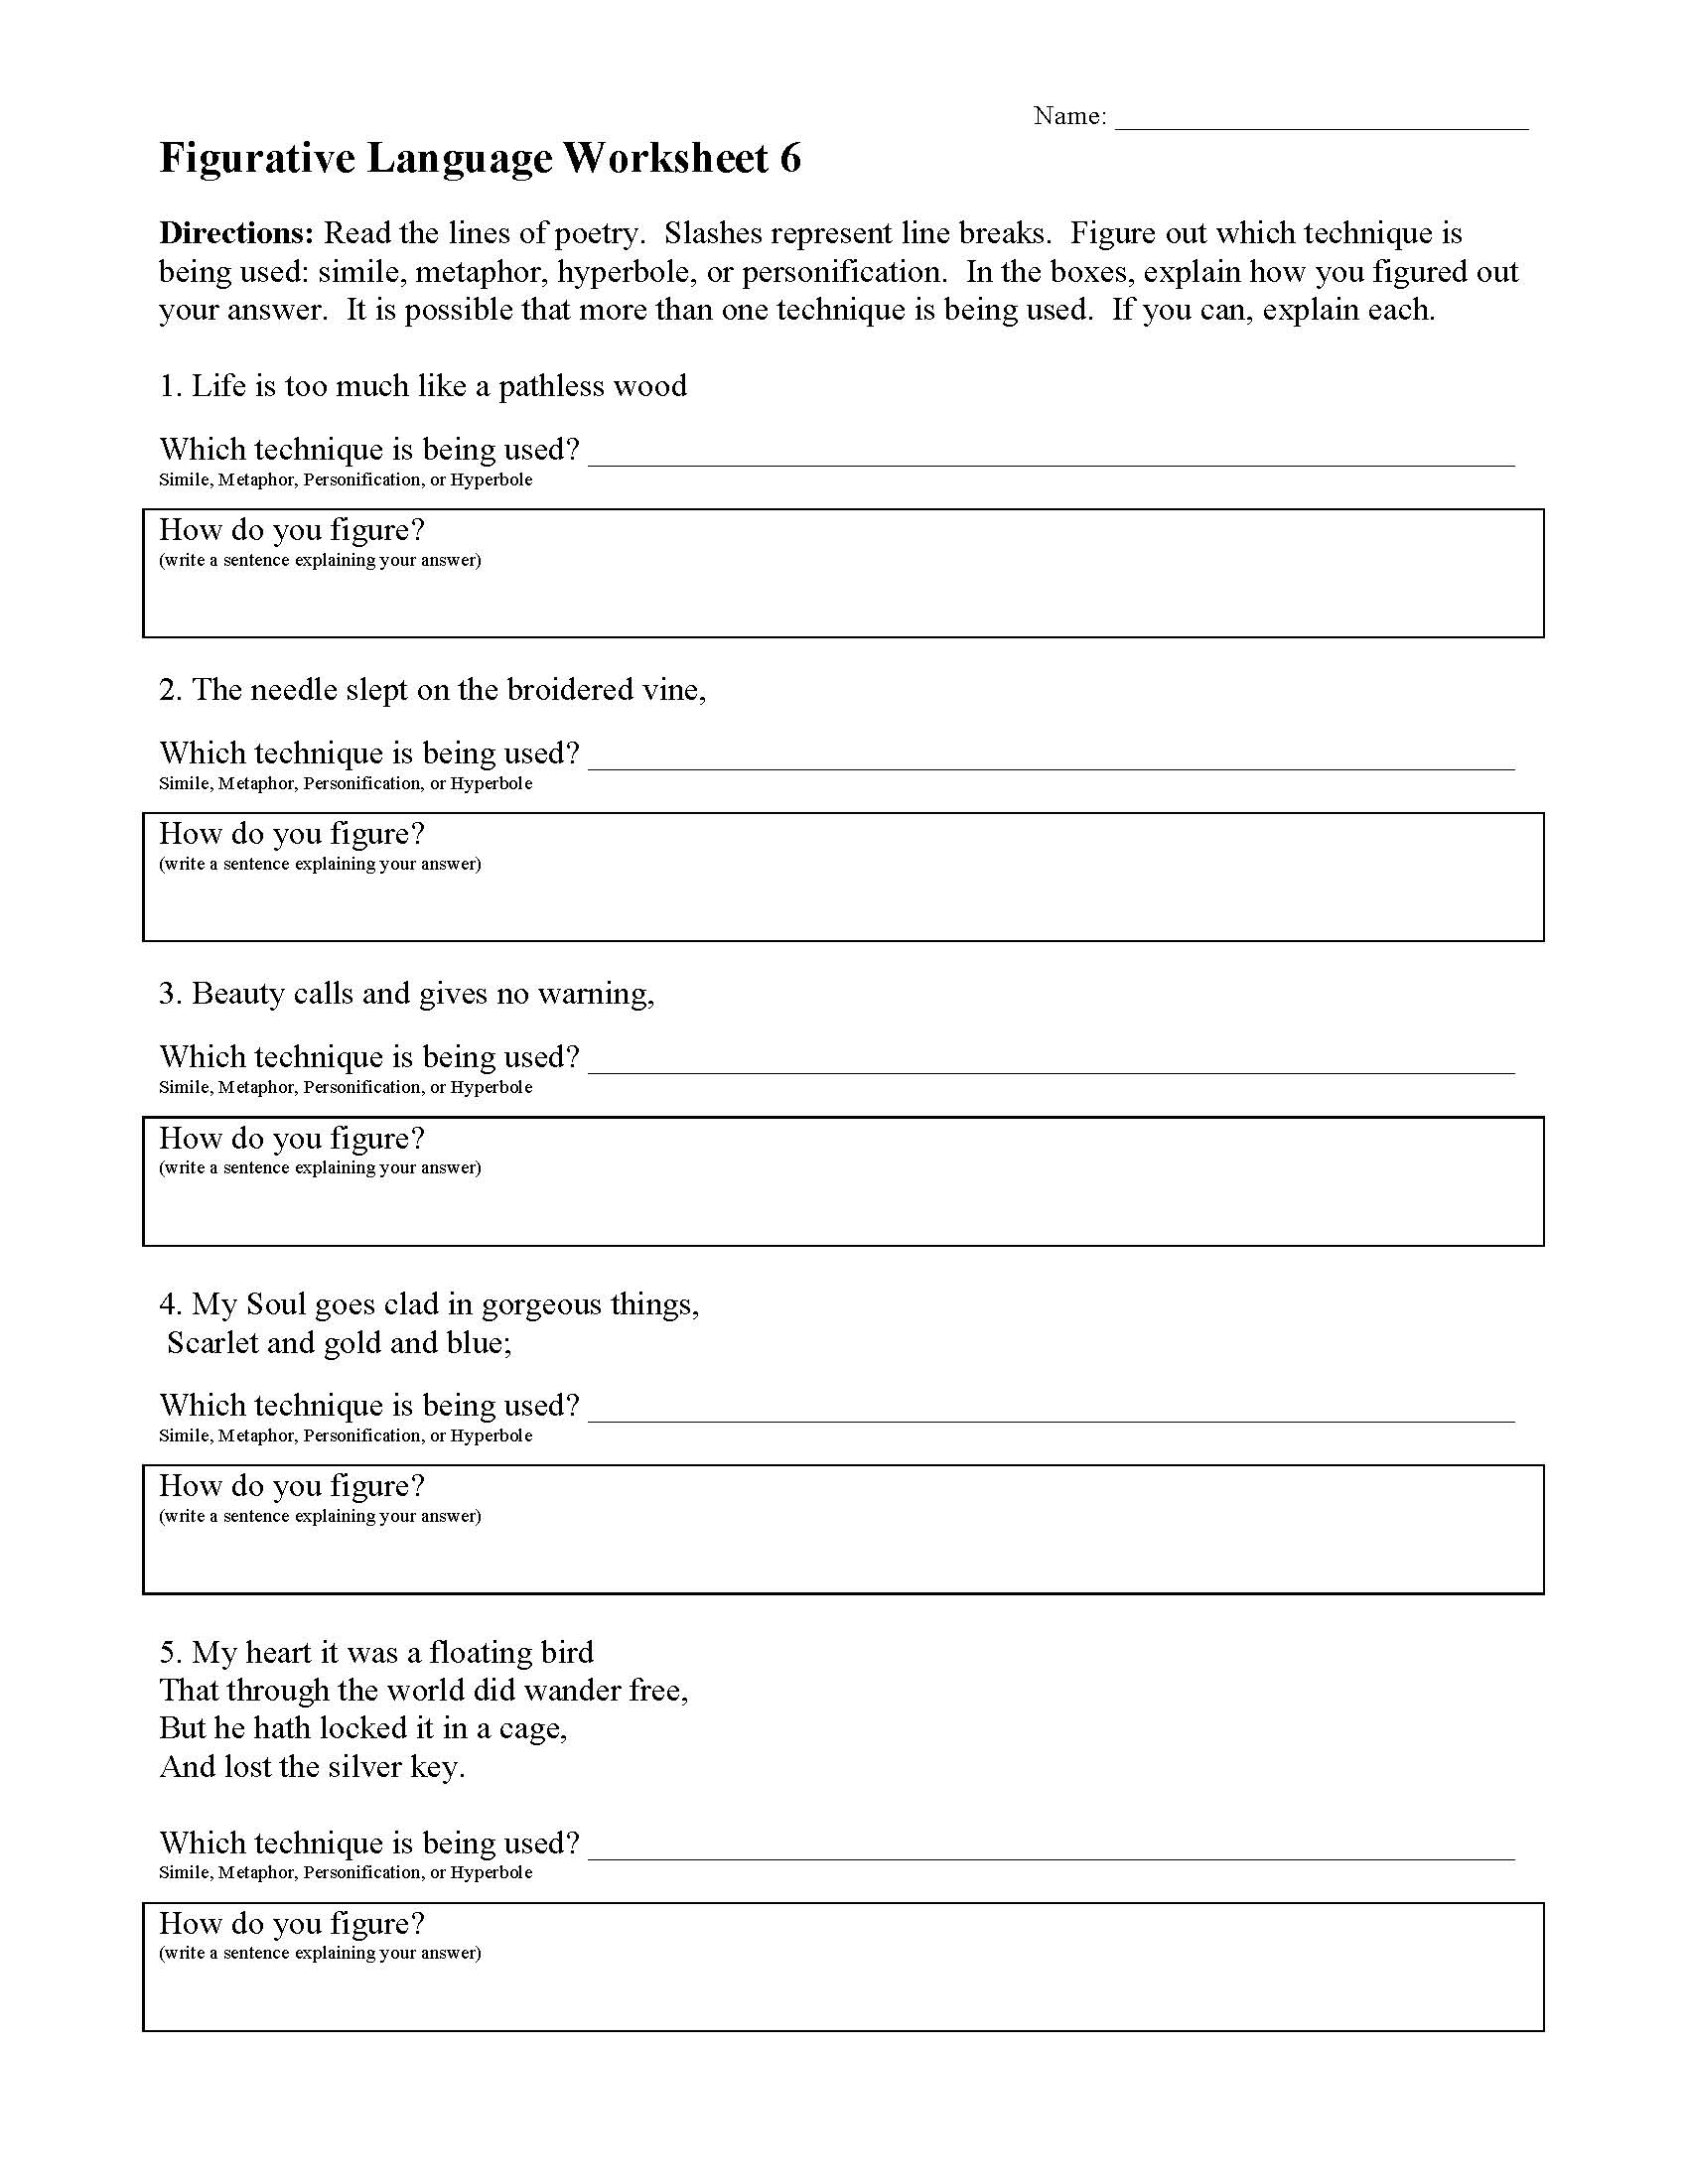 This is a preview image of Figurative Language Worksheet 6. Click on it to enlarge it or view the source file.